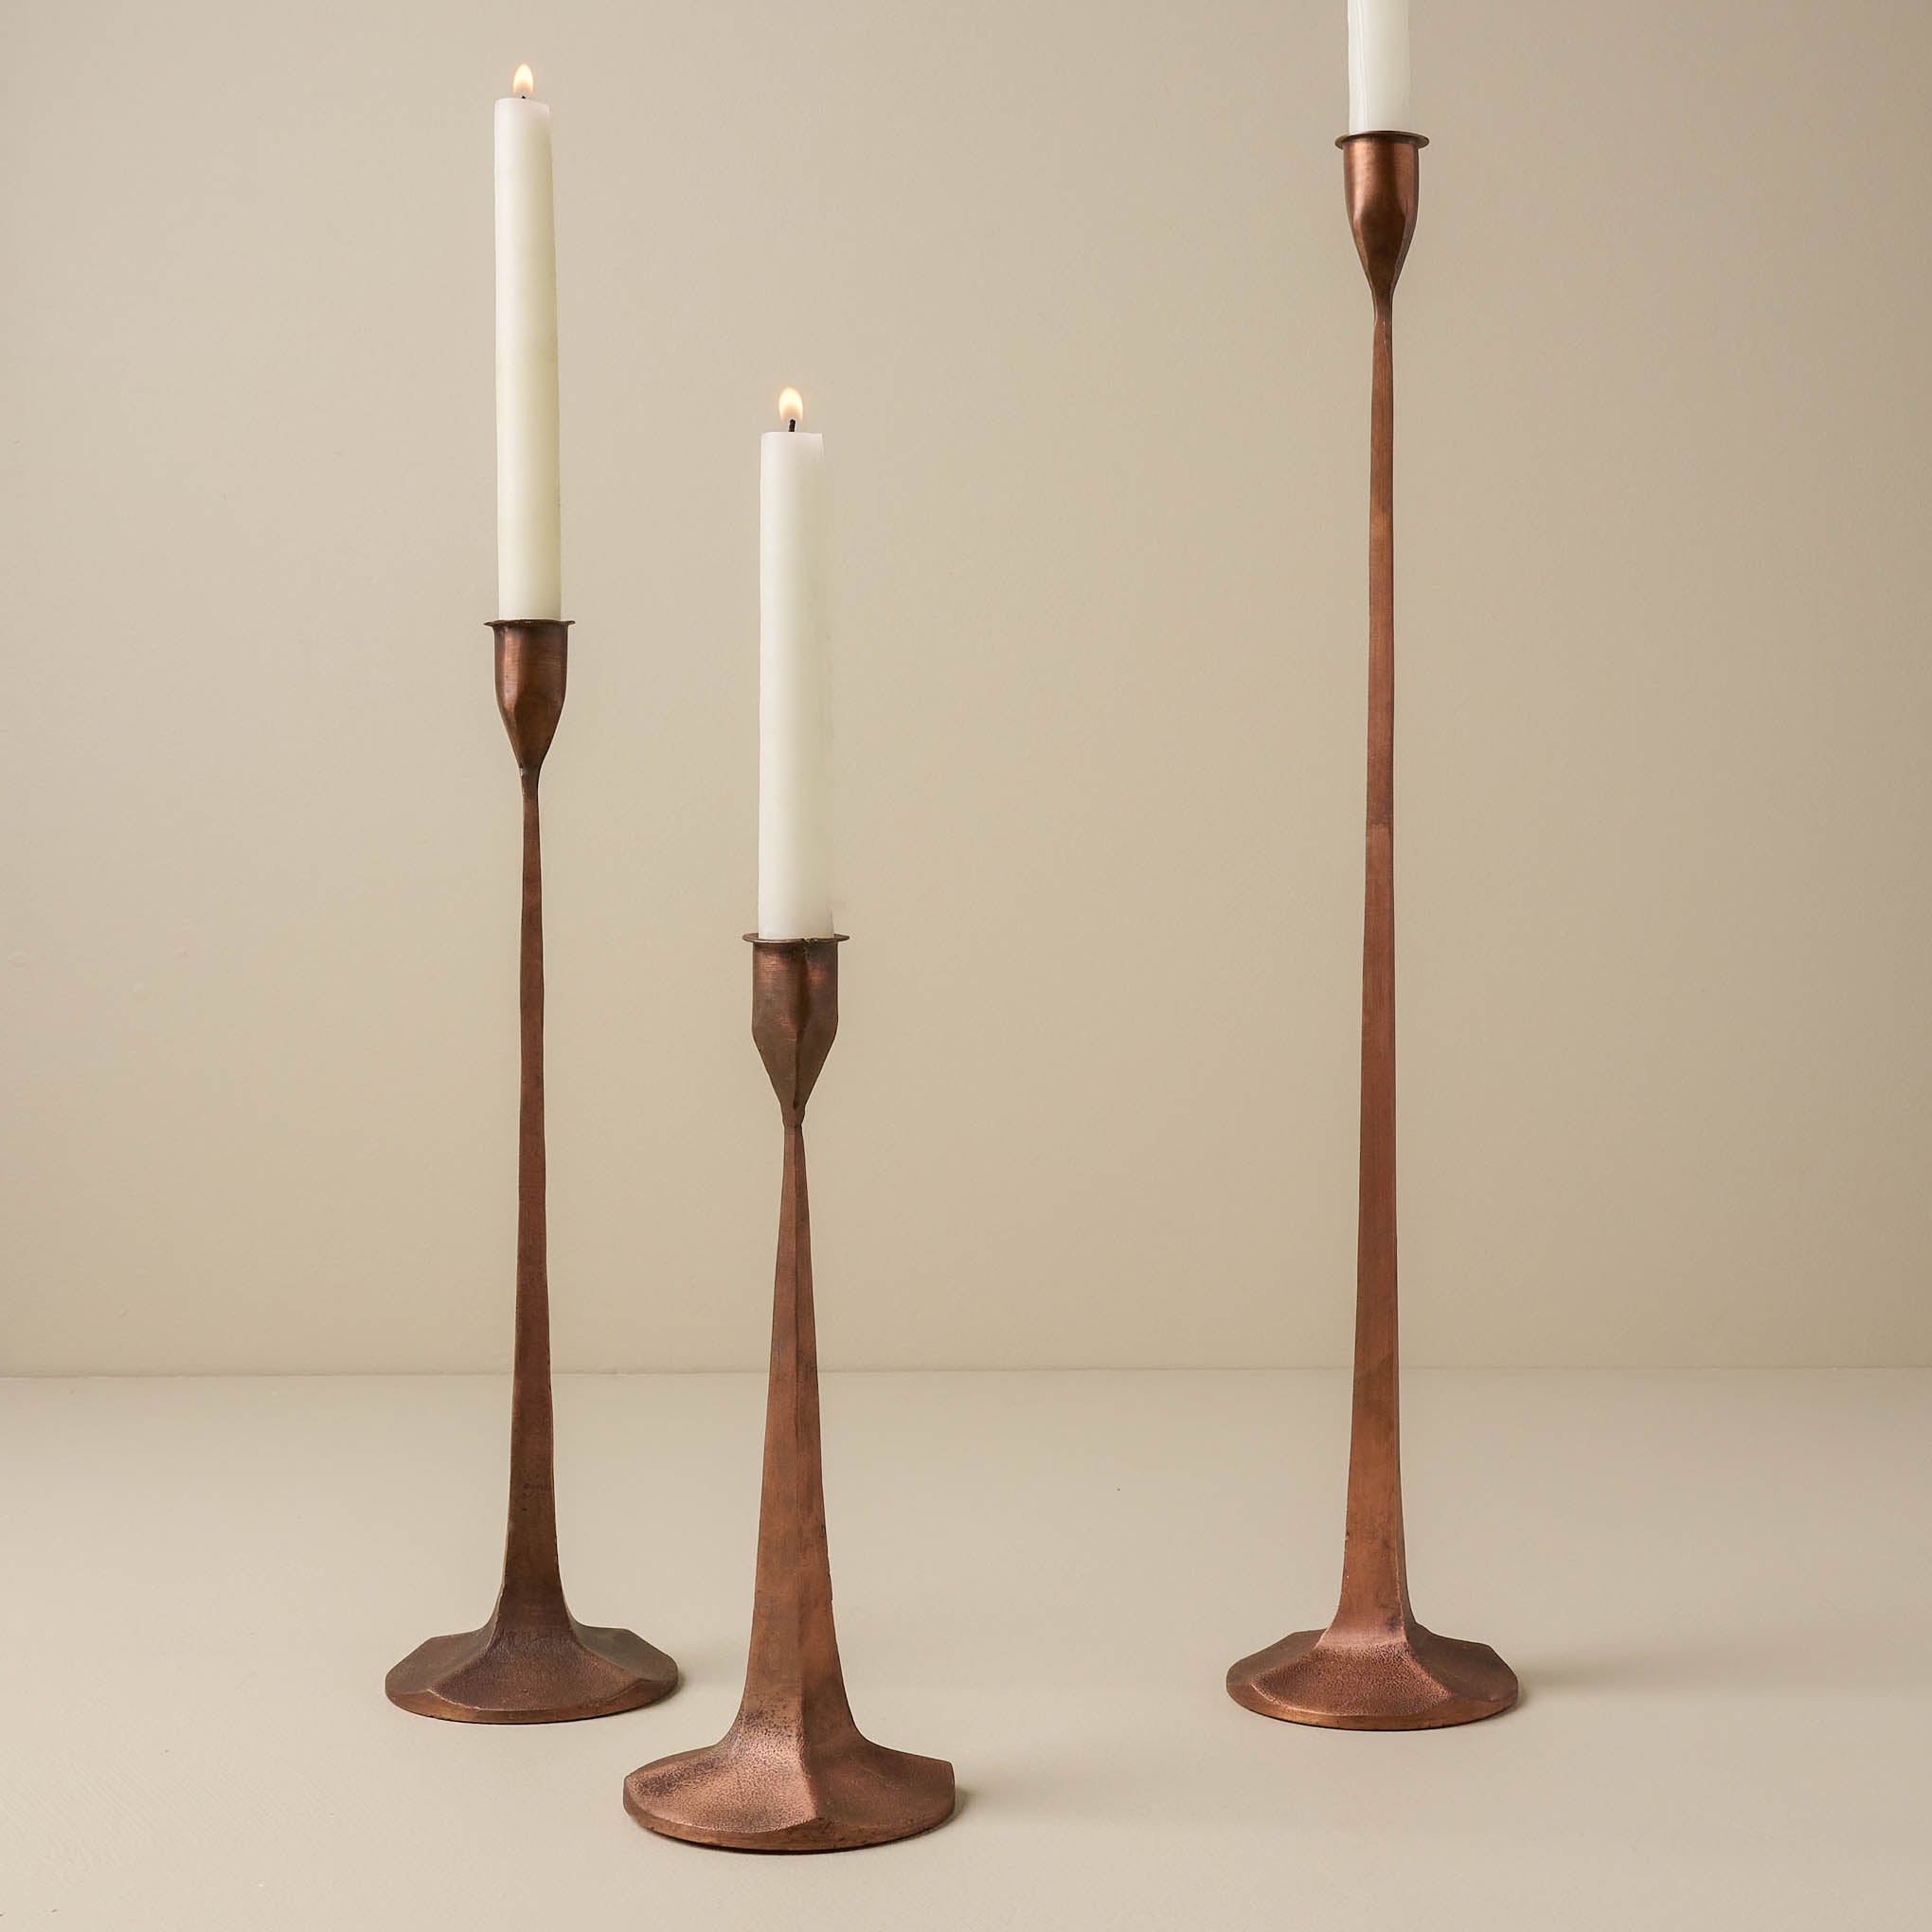 Antique Copper Gatecrest in three sizes with candlesticks Items range from $28.00 to $32.00